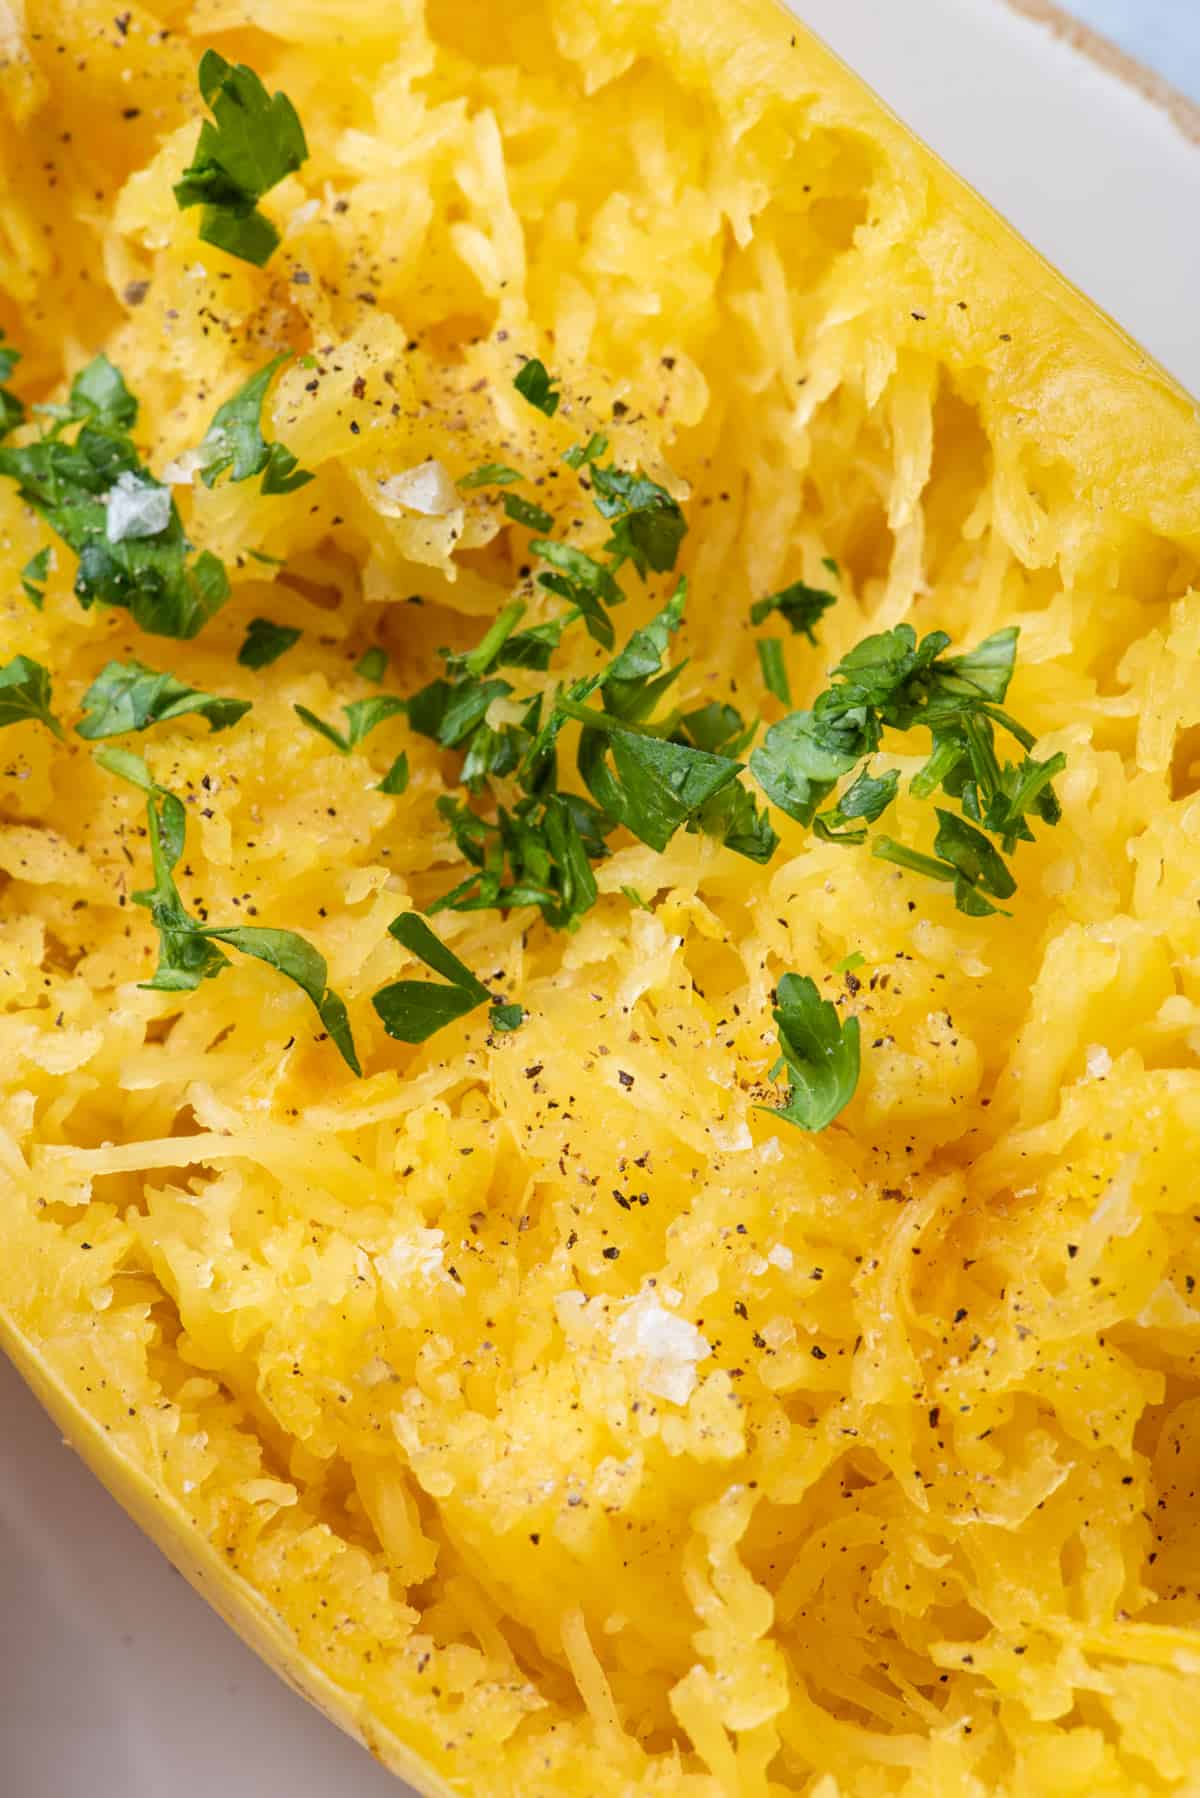 Close up of spaghetti squash to show the texture